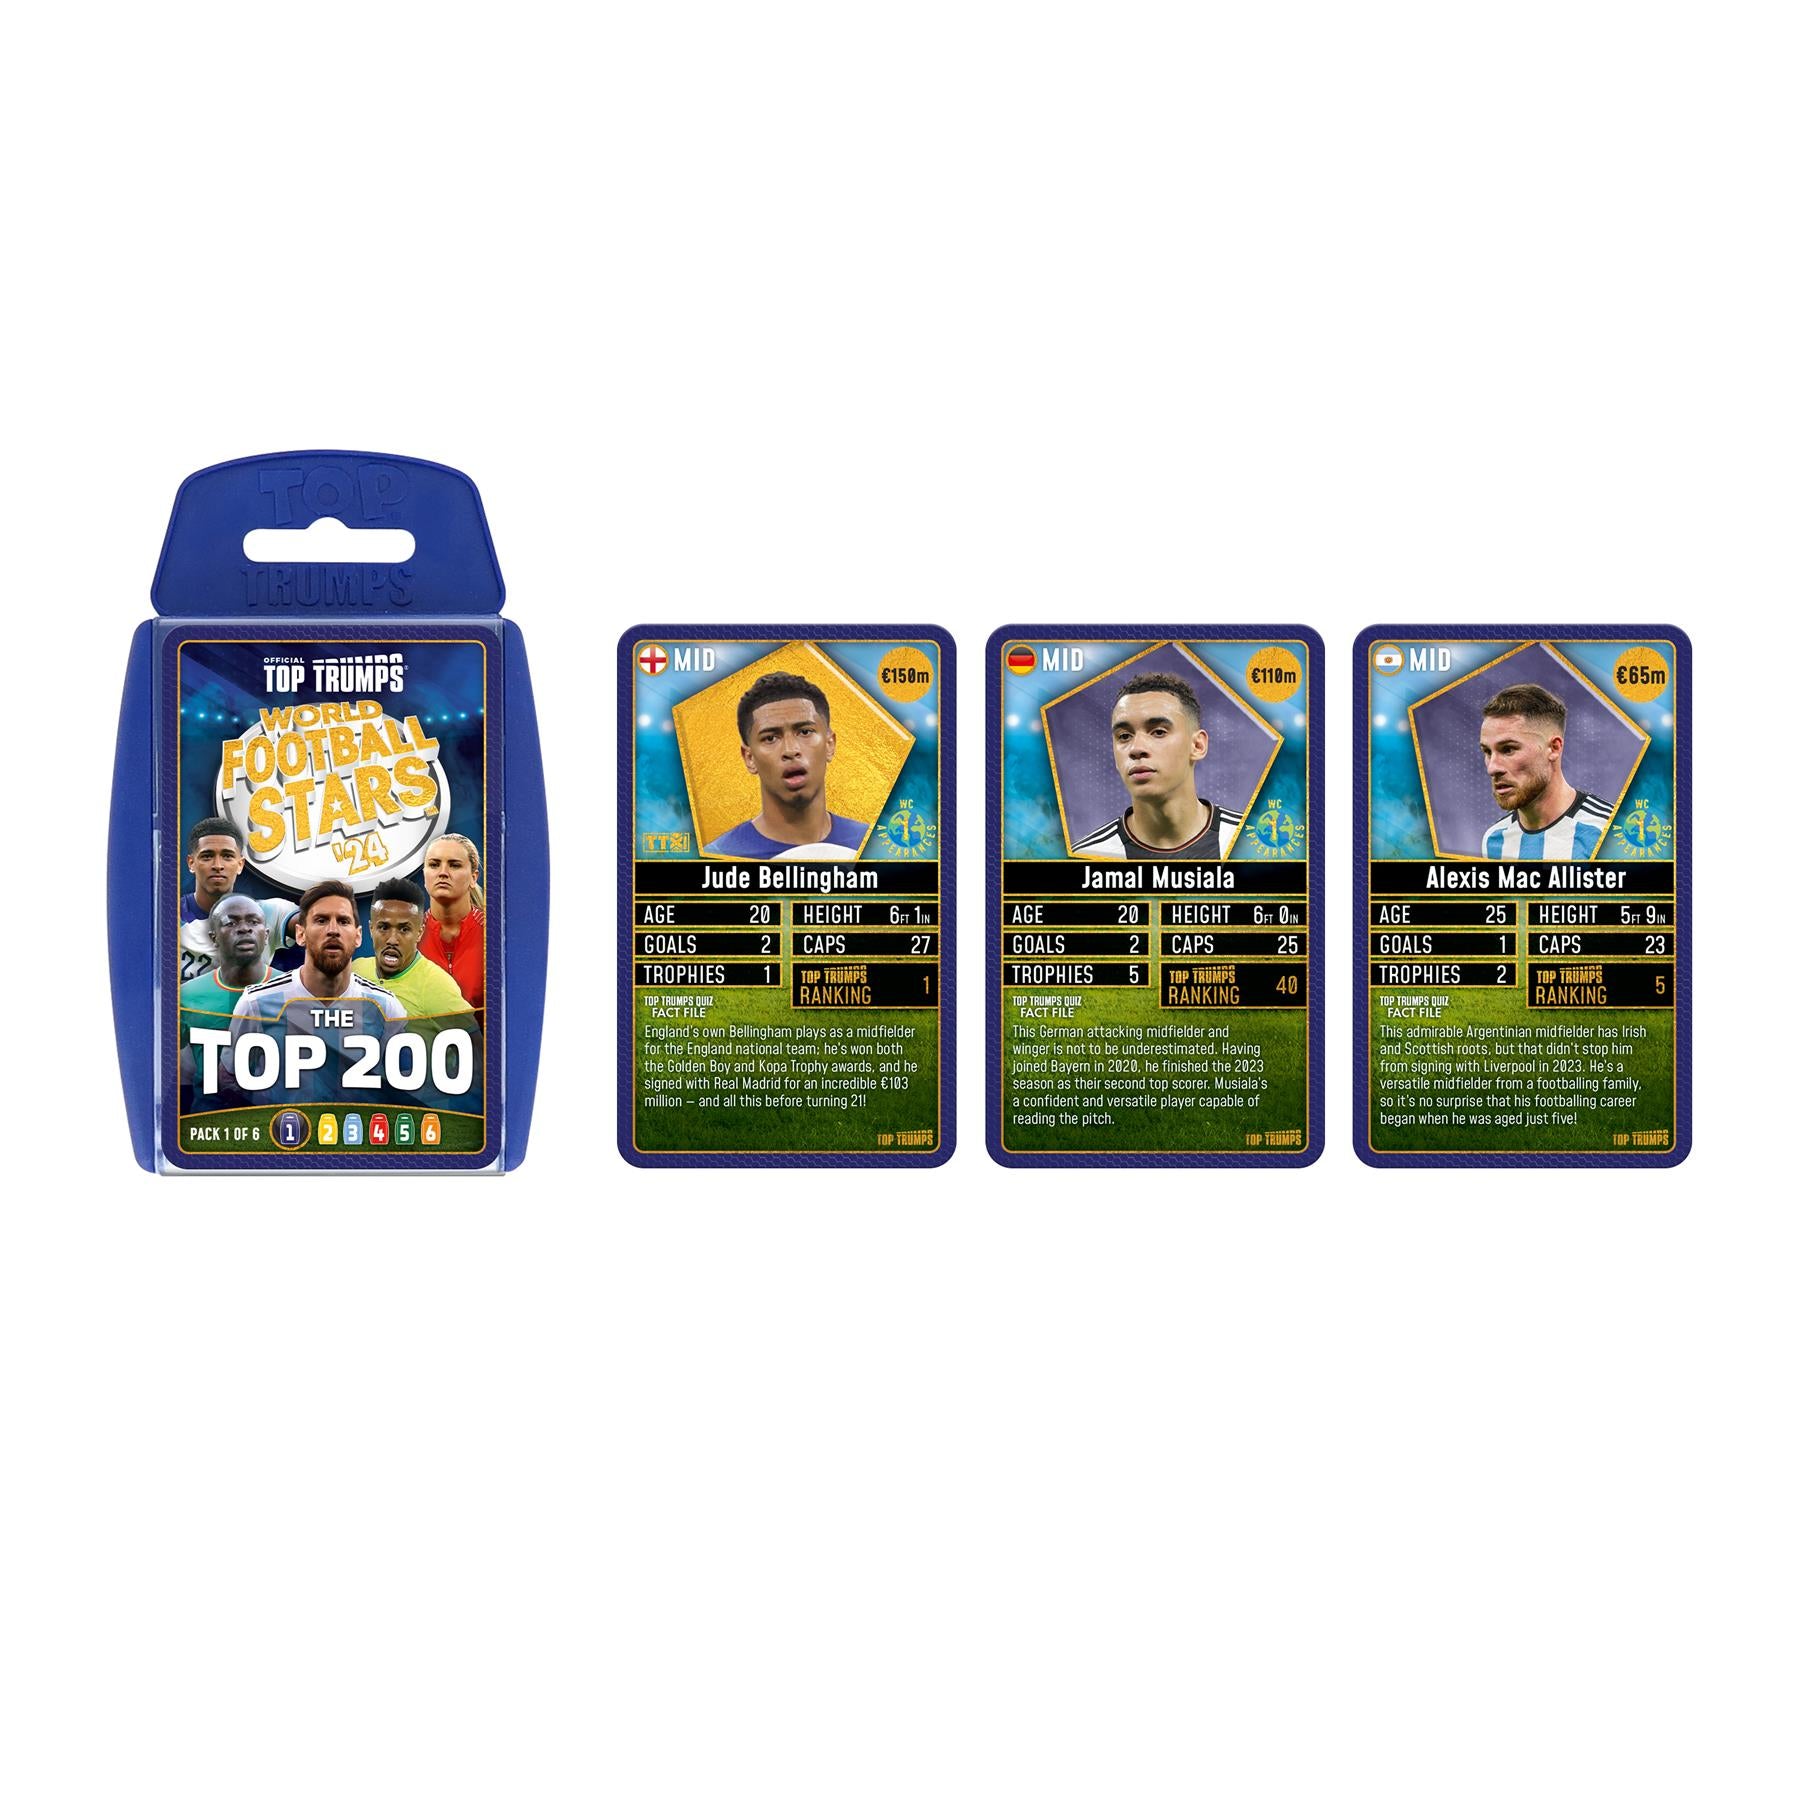 World Football Stars Top 200 - Pack 1 Top Trumps Card Game